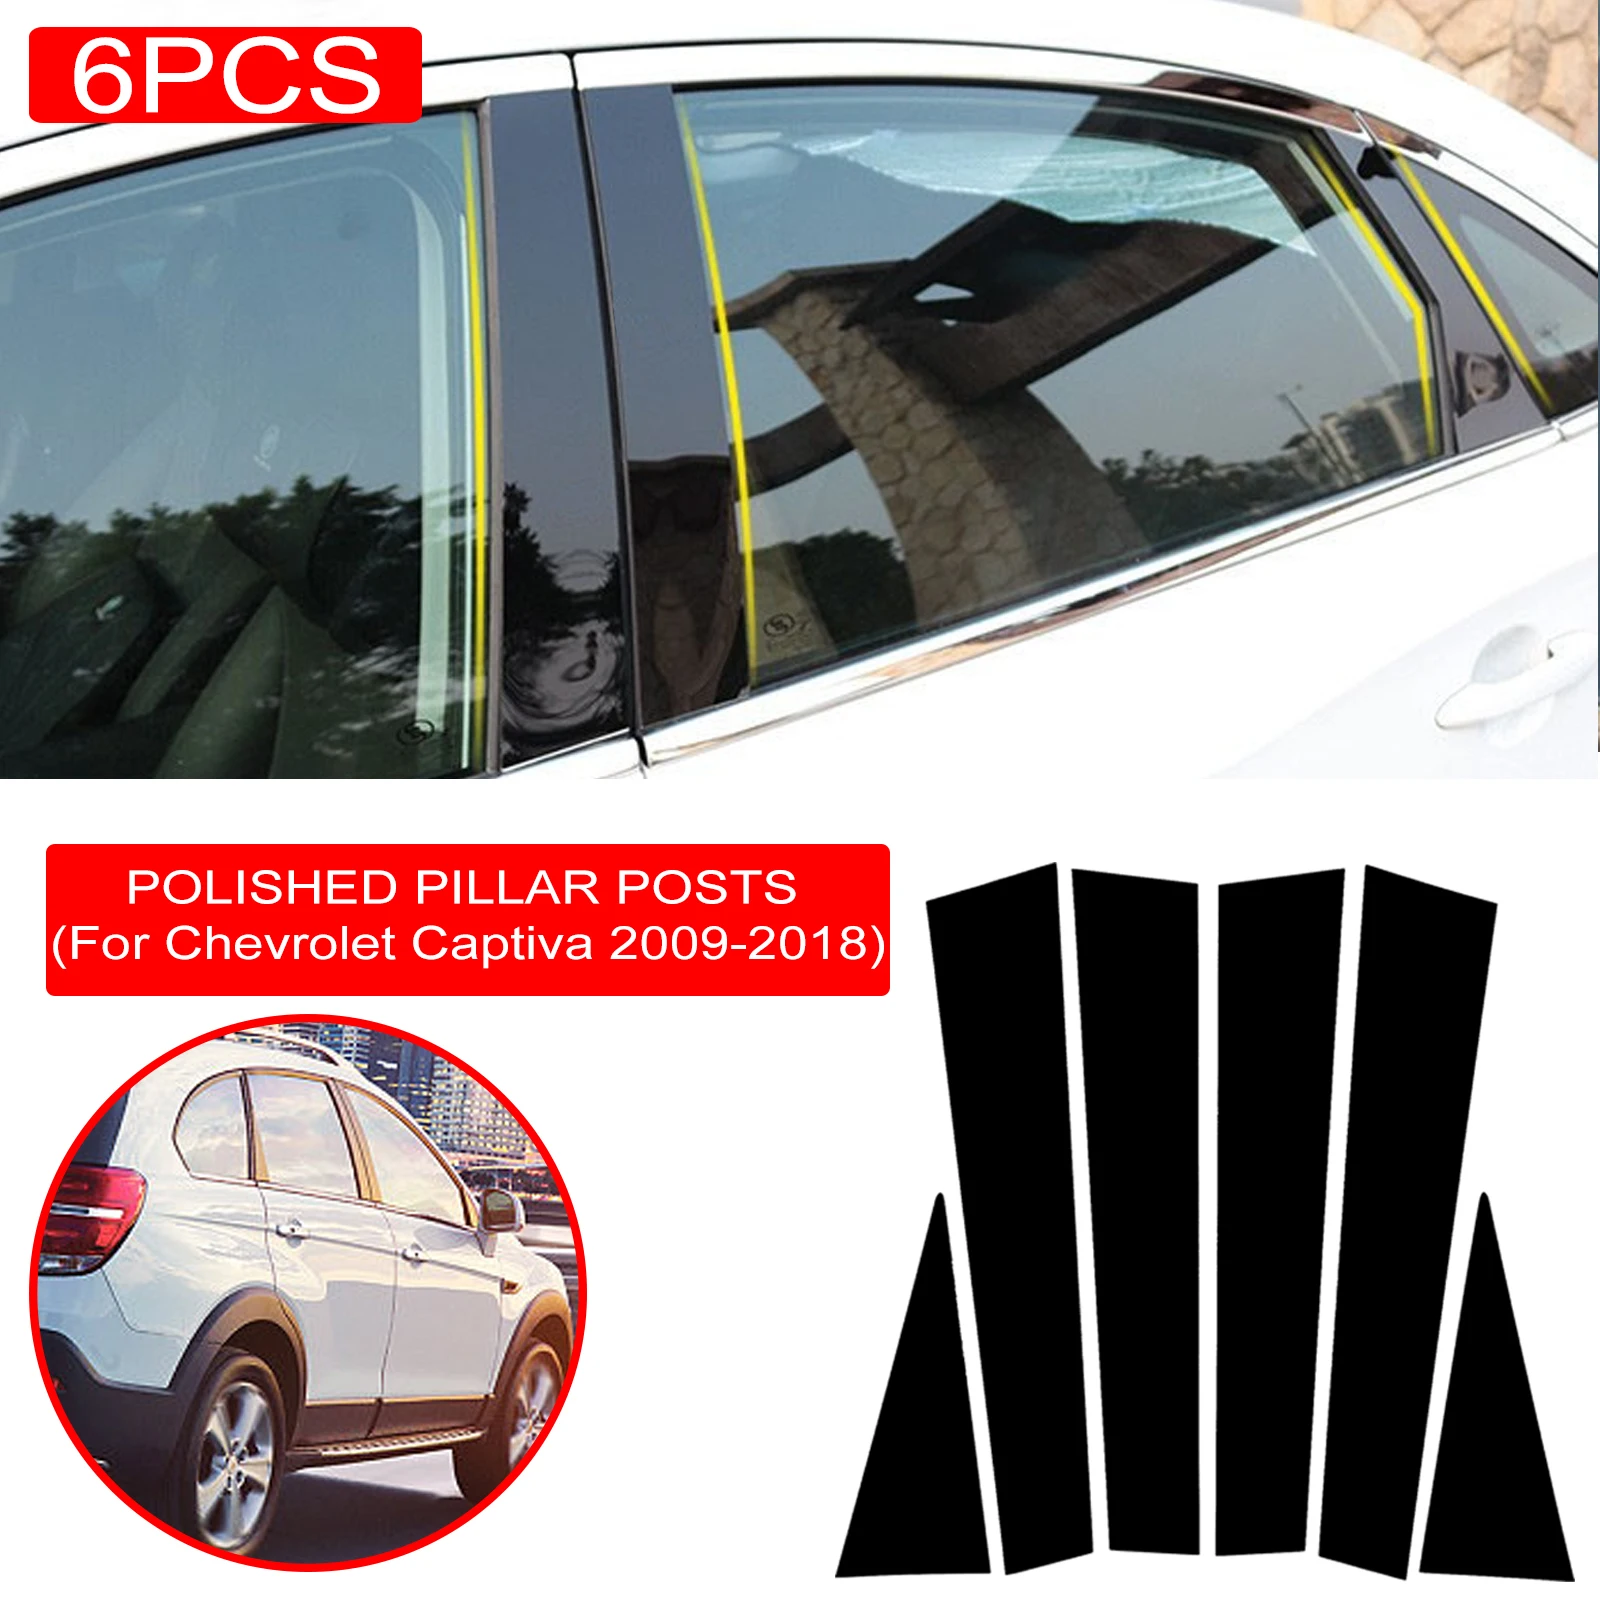 

6PCS Polished Pillar Posts For Chevrolet Captiva 2009-2018 Car Window Trim Cover BC Column Sticker Styling Accessories